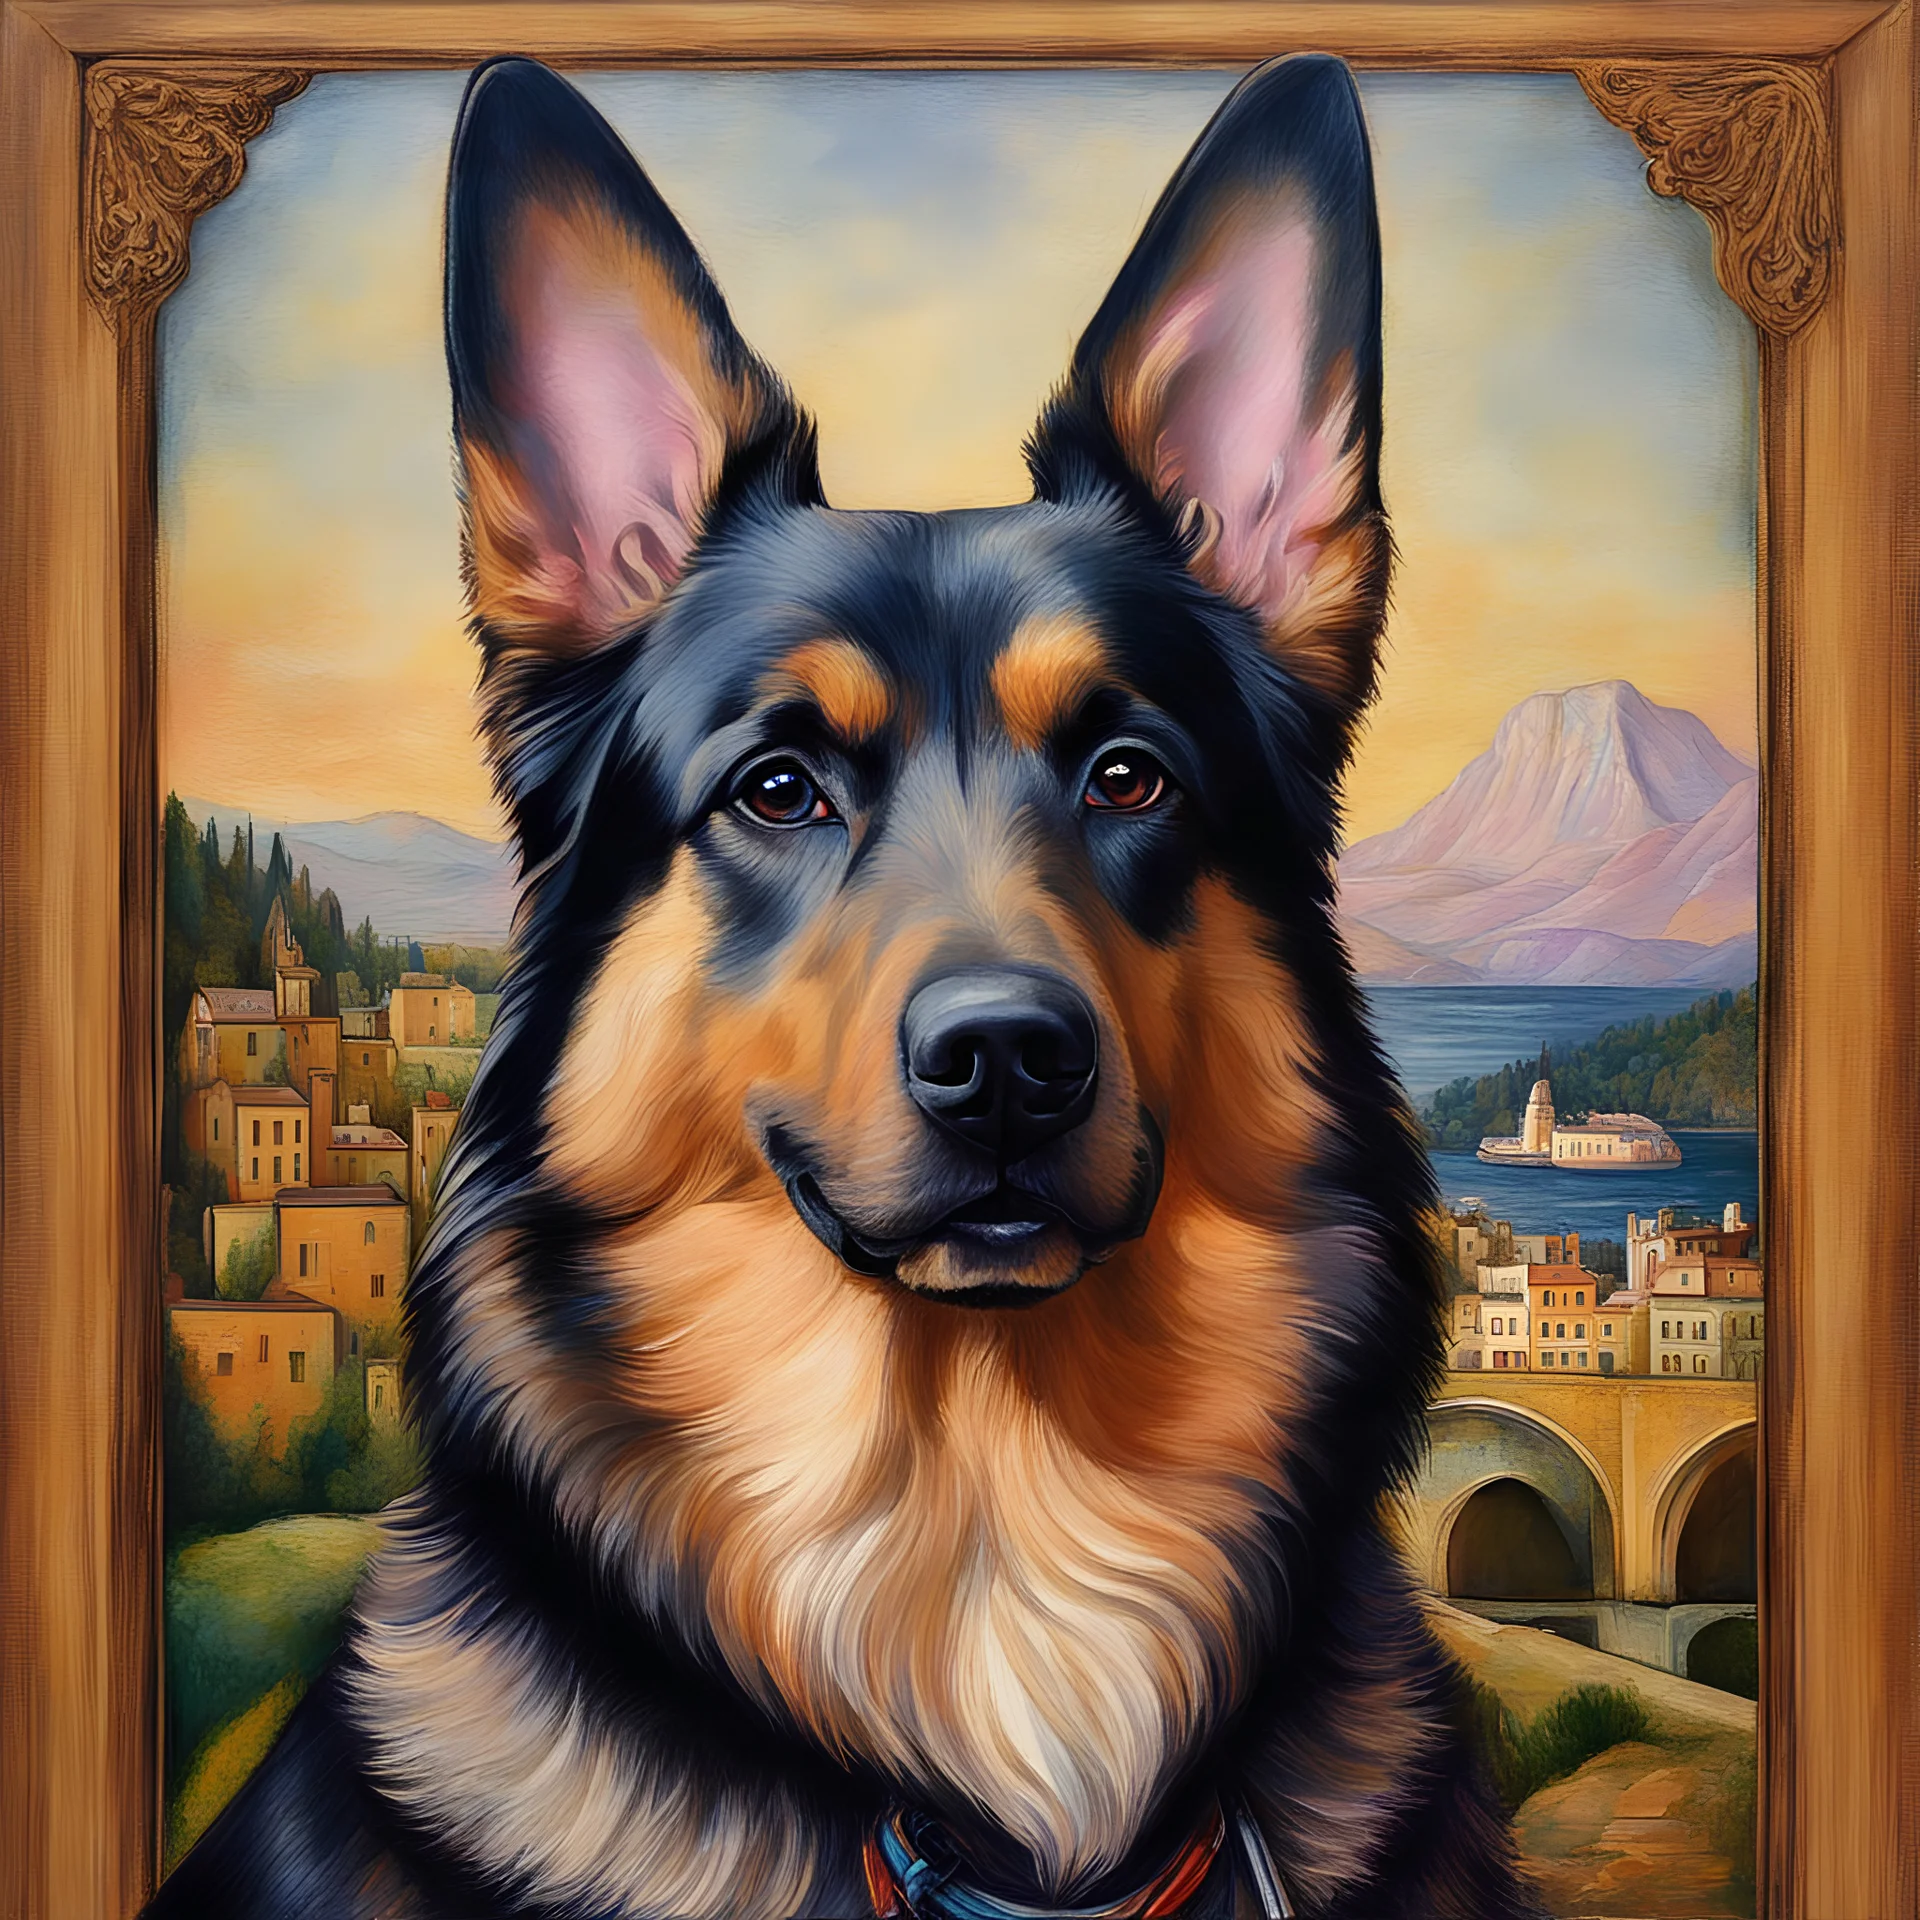 /imagine prompt: paint a German Shepherd dog into a unique masterpiece in the likeness of the Mona Lisa featuring her enigmatic smile on the dog by artist Leonardo DaVinci. The German Shepherd dog is to look like the Mona Lisa in this interpretation. Utilise crayons as the medium, capture the essence of DaVinci's iconic style.